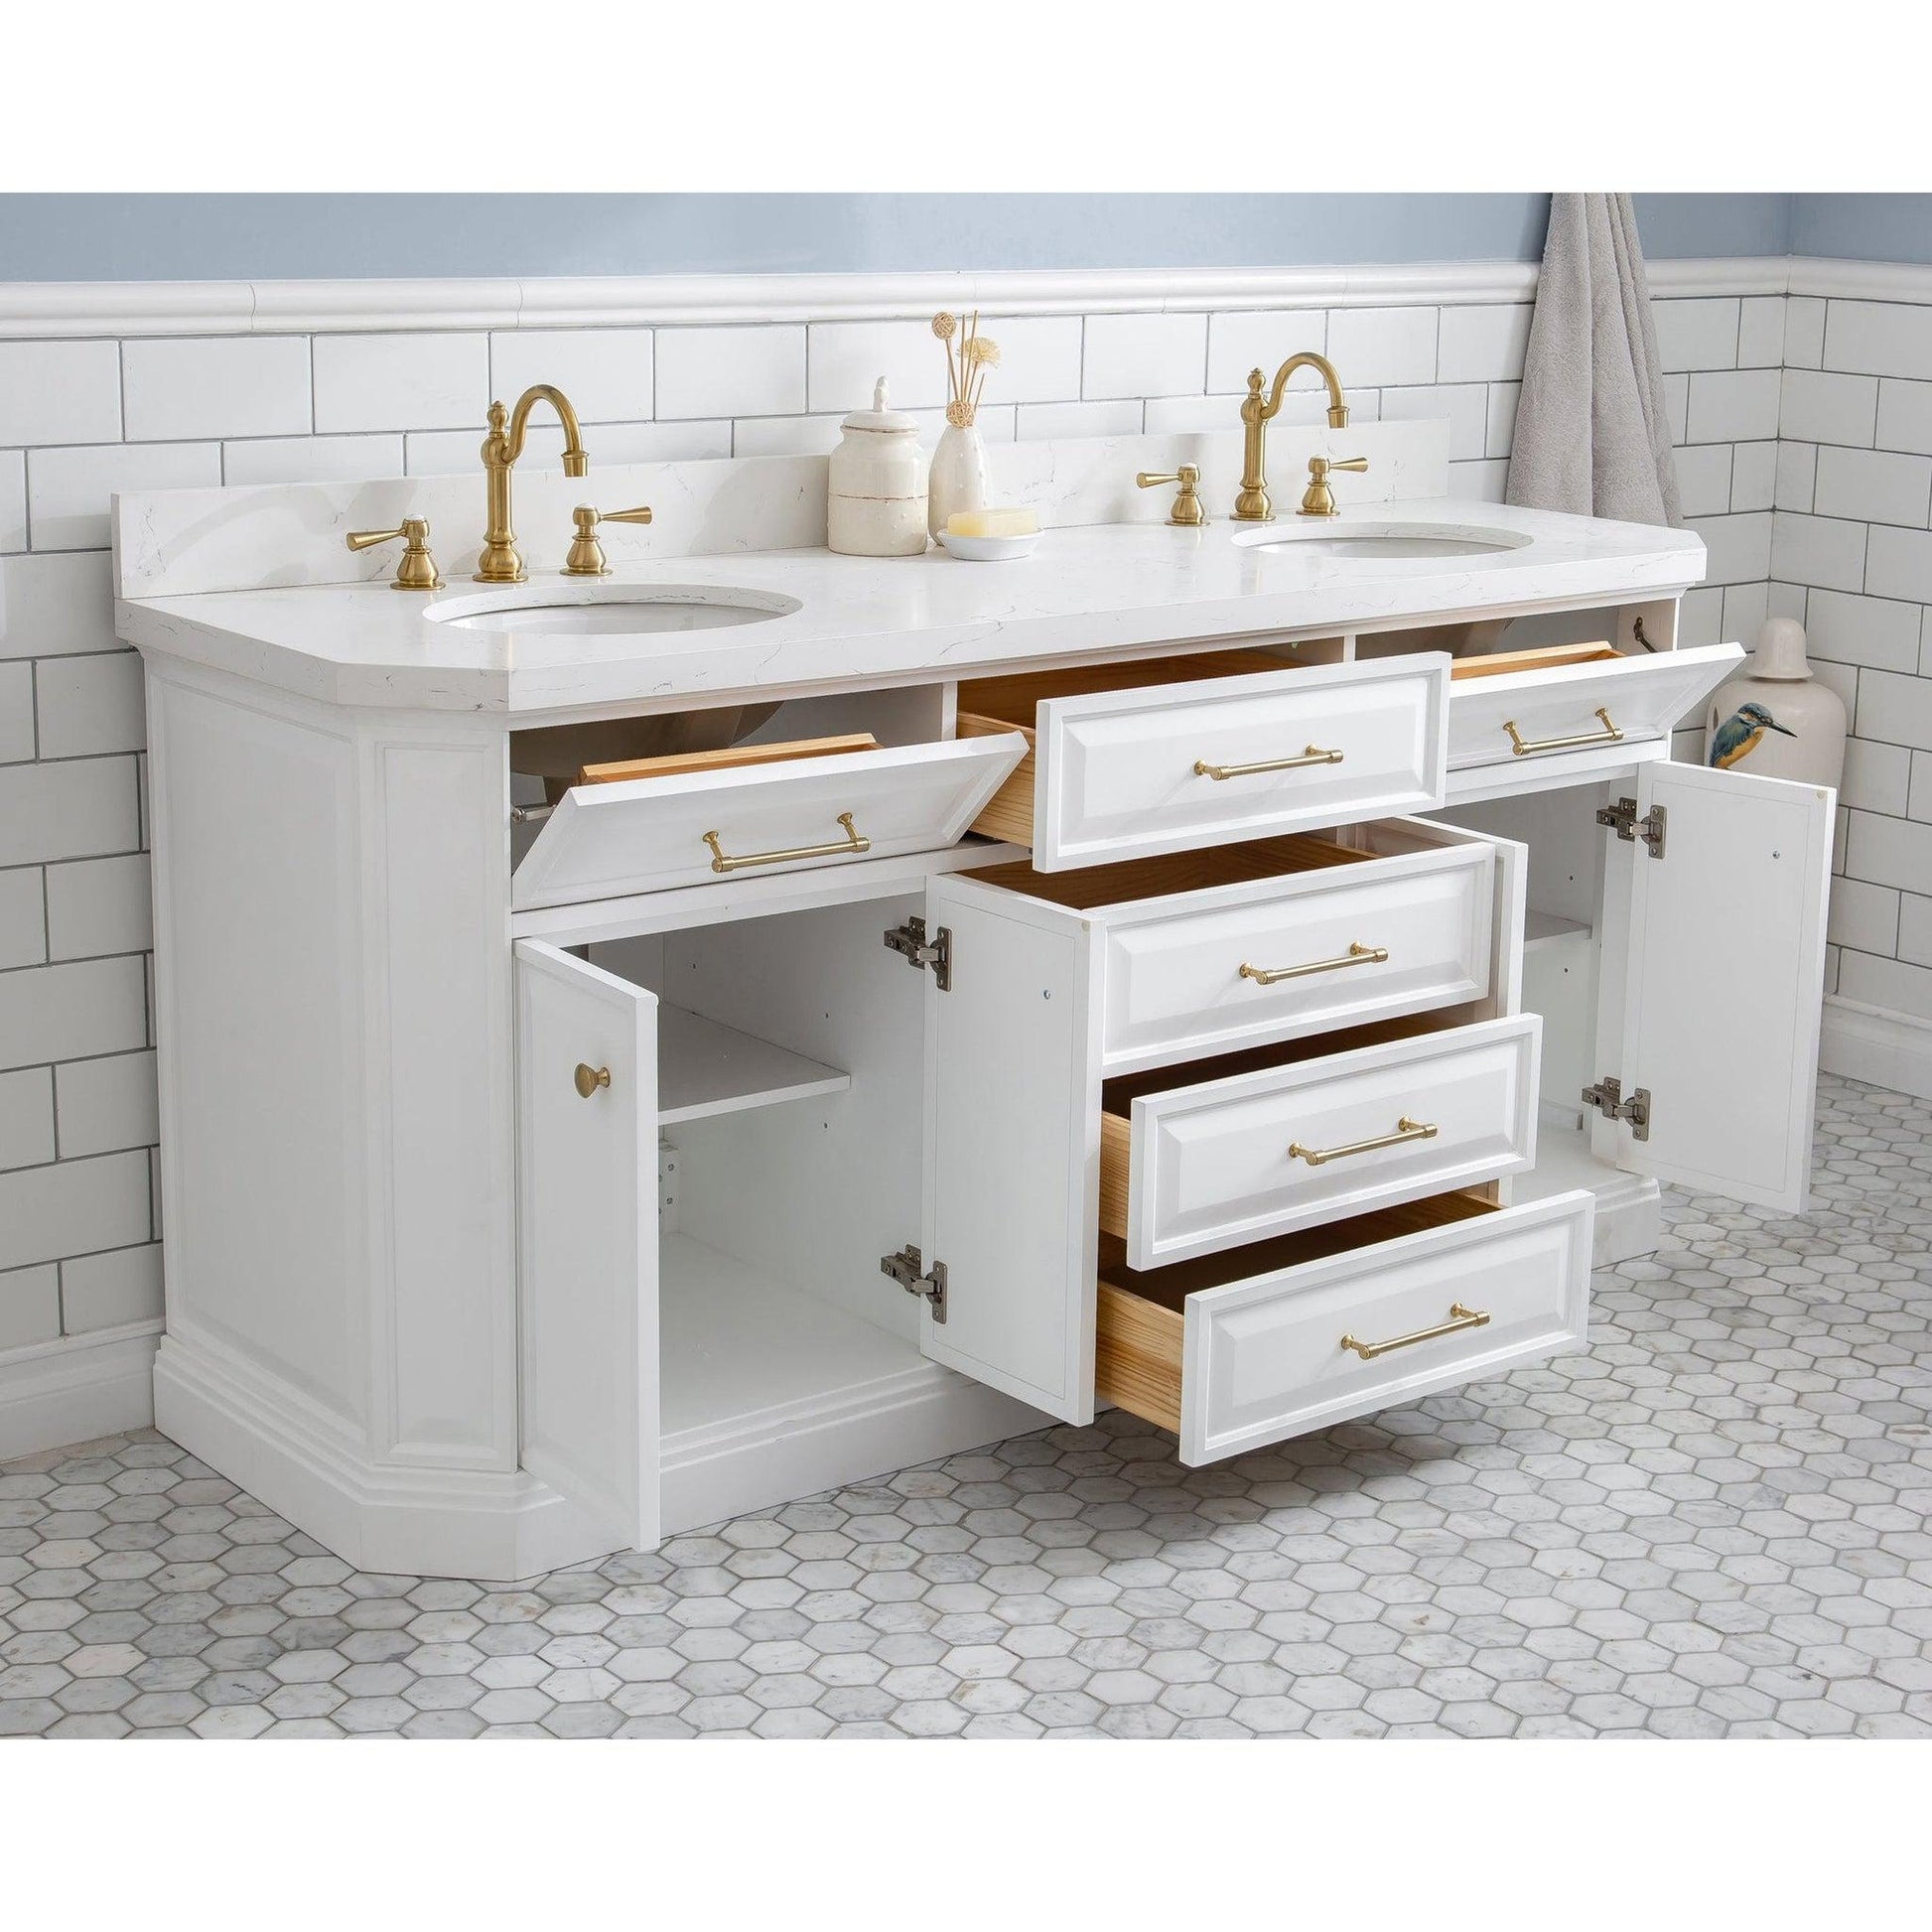 Water Creation Palace 72" Quartz Carrara Pure White Bathroom Vanity Set With Hardware in Satin Gold Finish And Only Mirrors in Chrome Finish